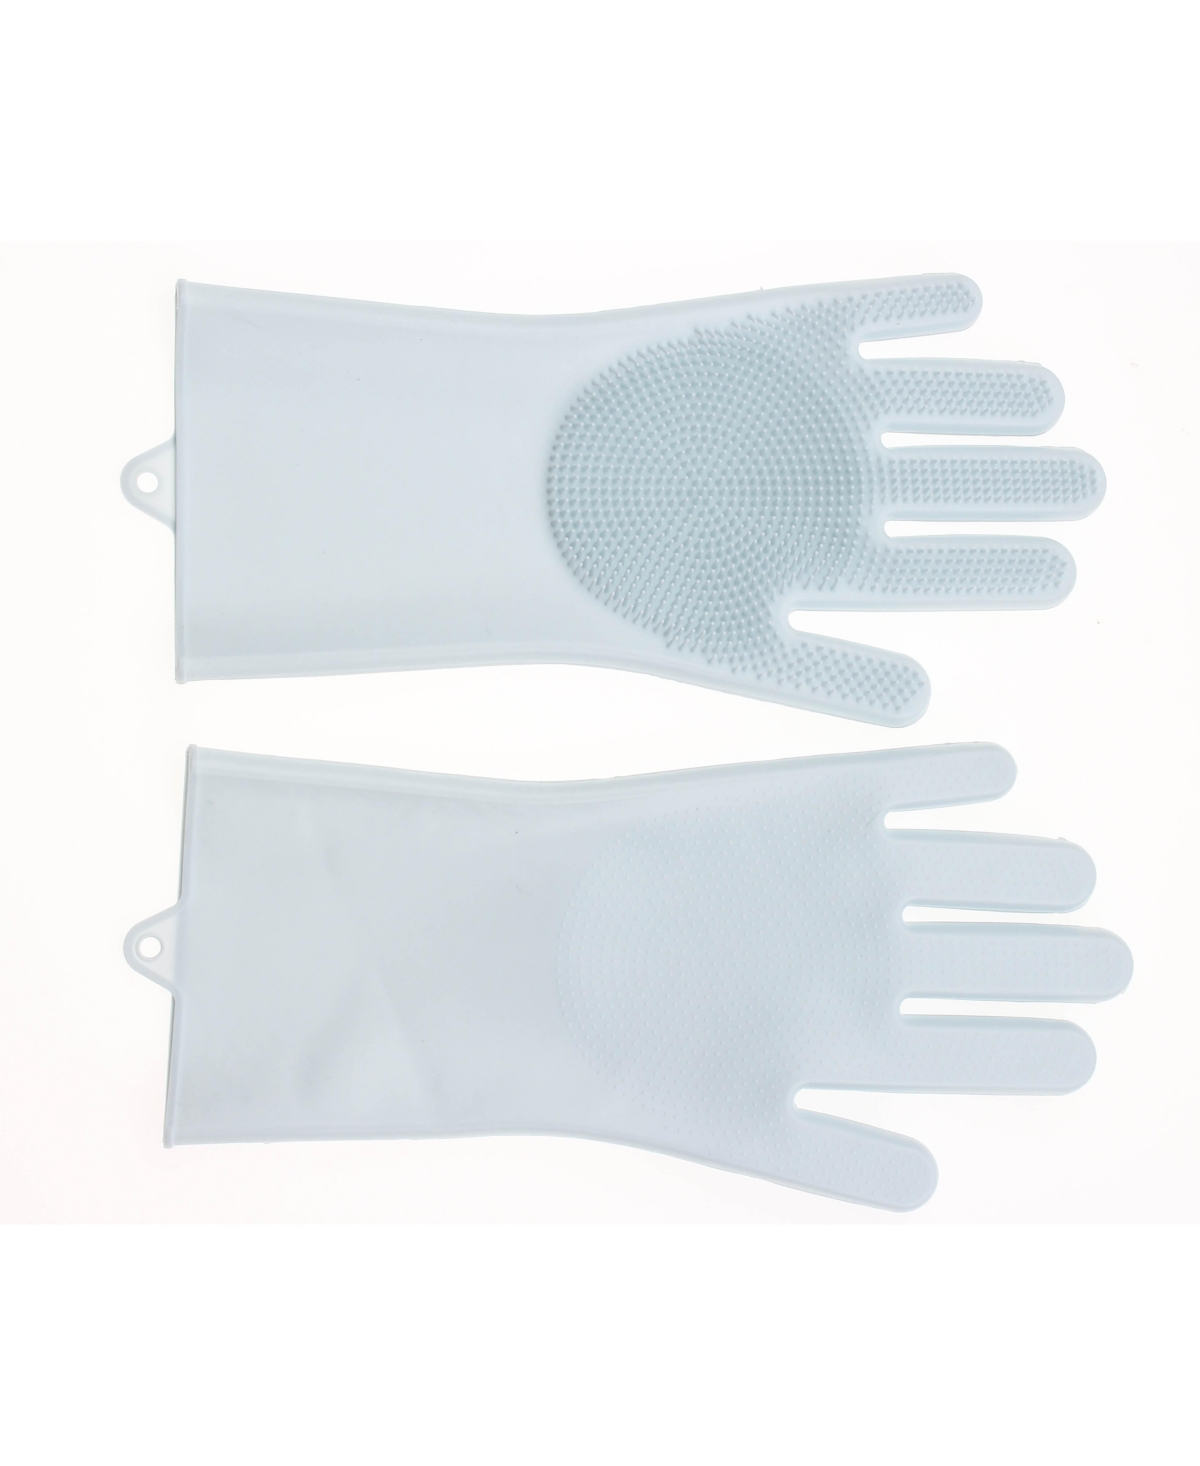 Art & Cook 2 Piece Scrubbing Gloves With Silicone Bristles Set In Sky Blue